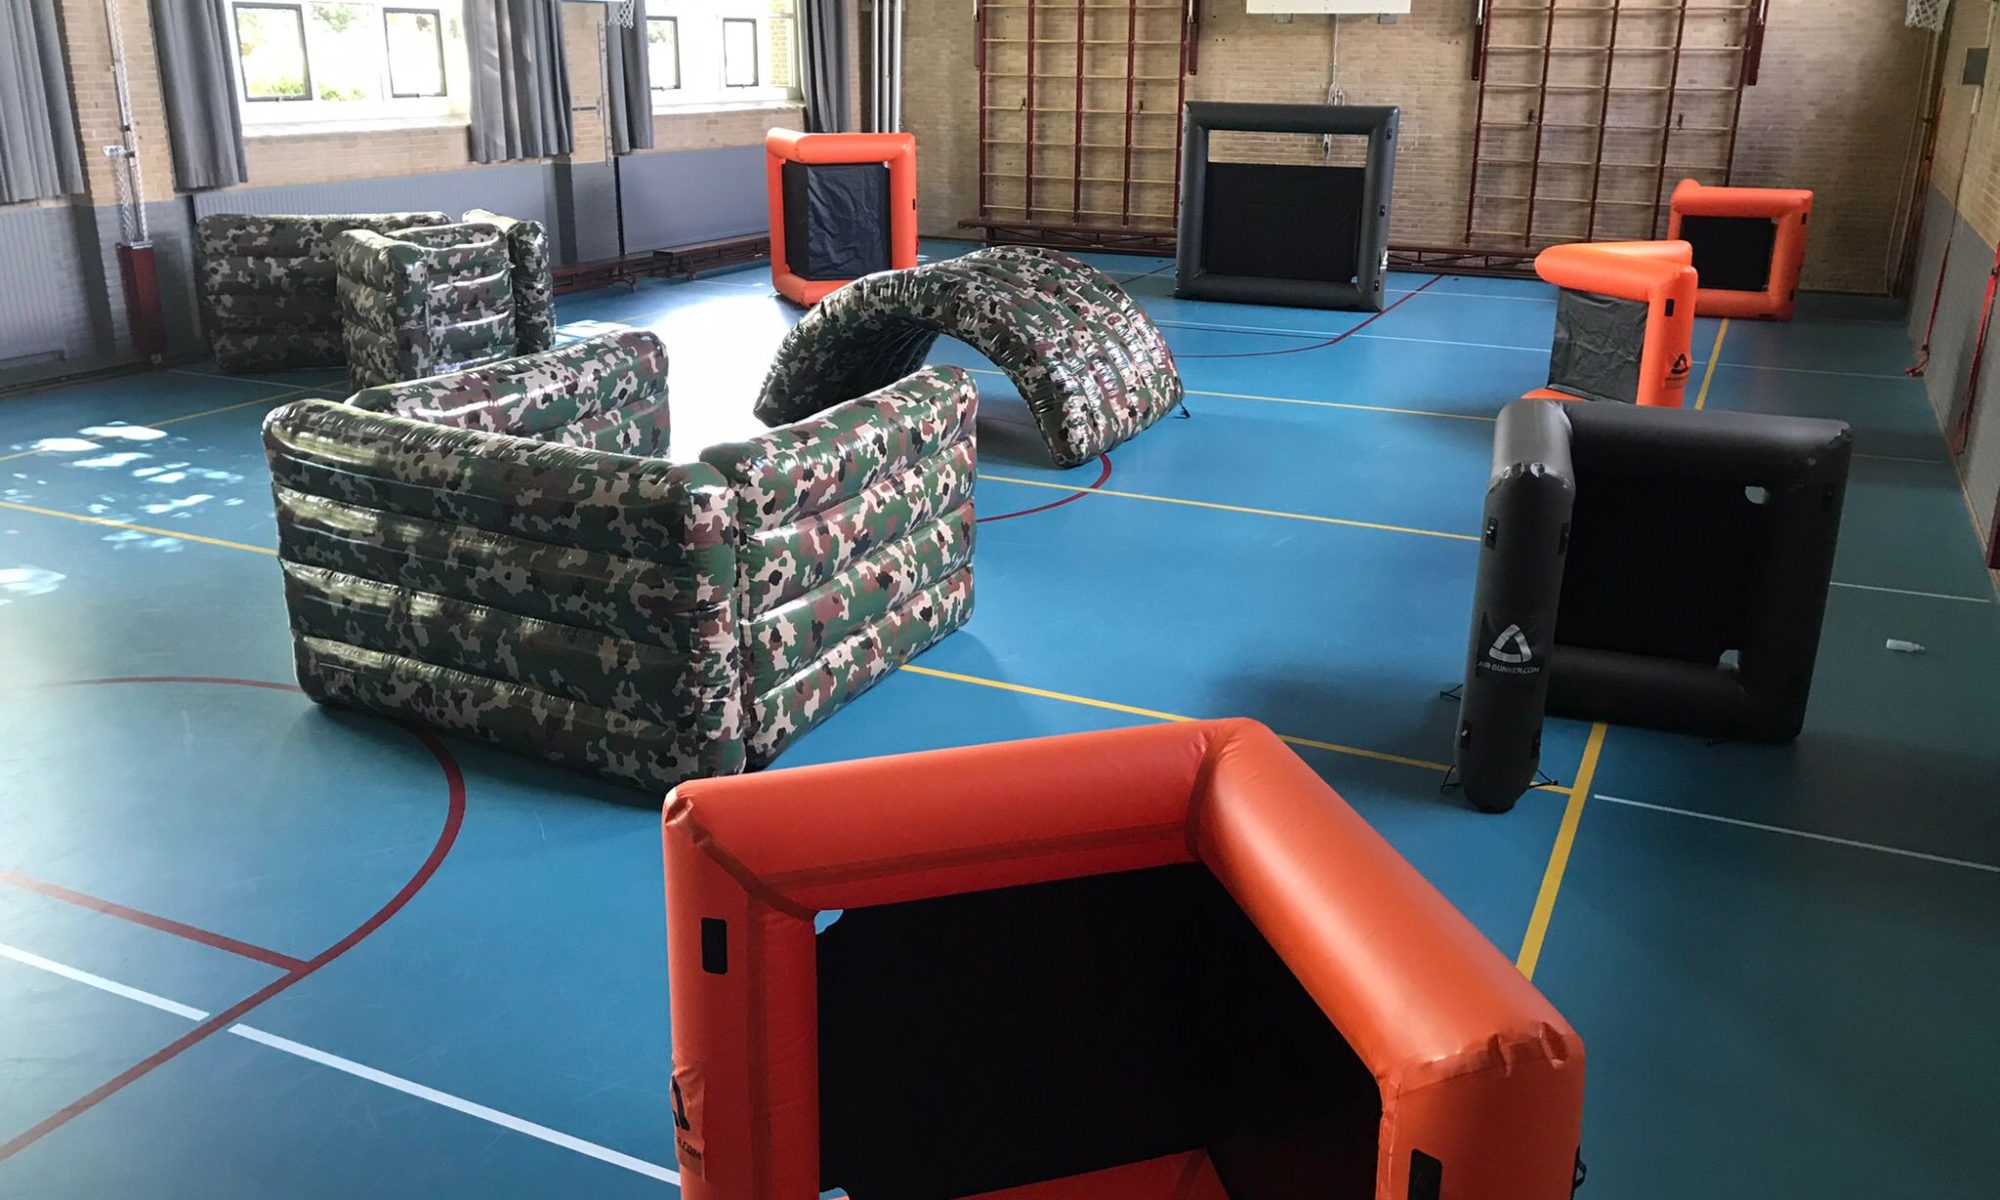 lasergame obstakels in een gymzaal